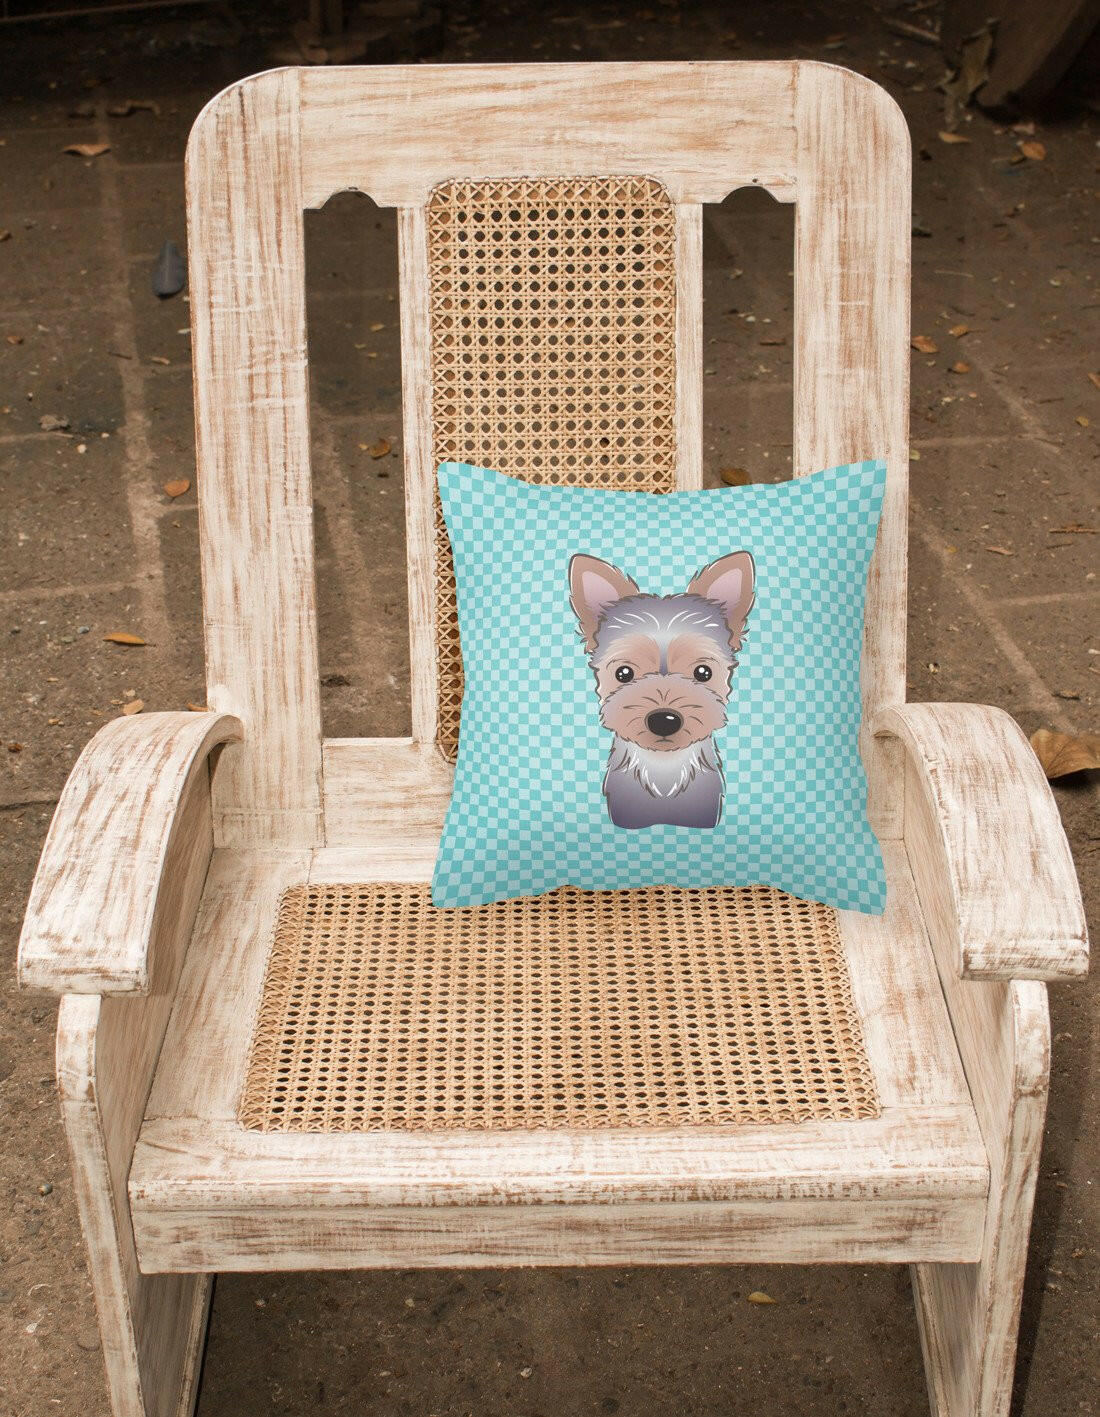 Checkerboard Blue Yorkie Puppy Canvas Fabric Decorative Pillow BB1170PW1414 - the-store.com